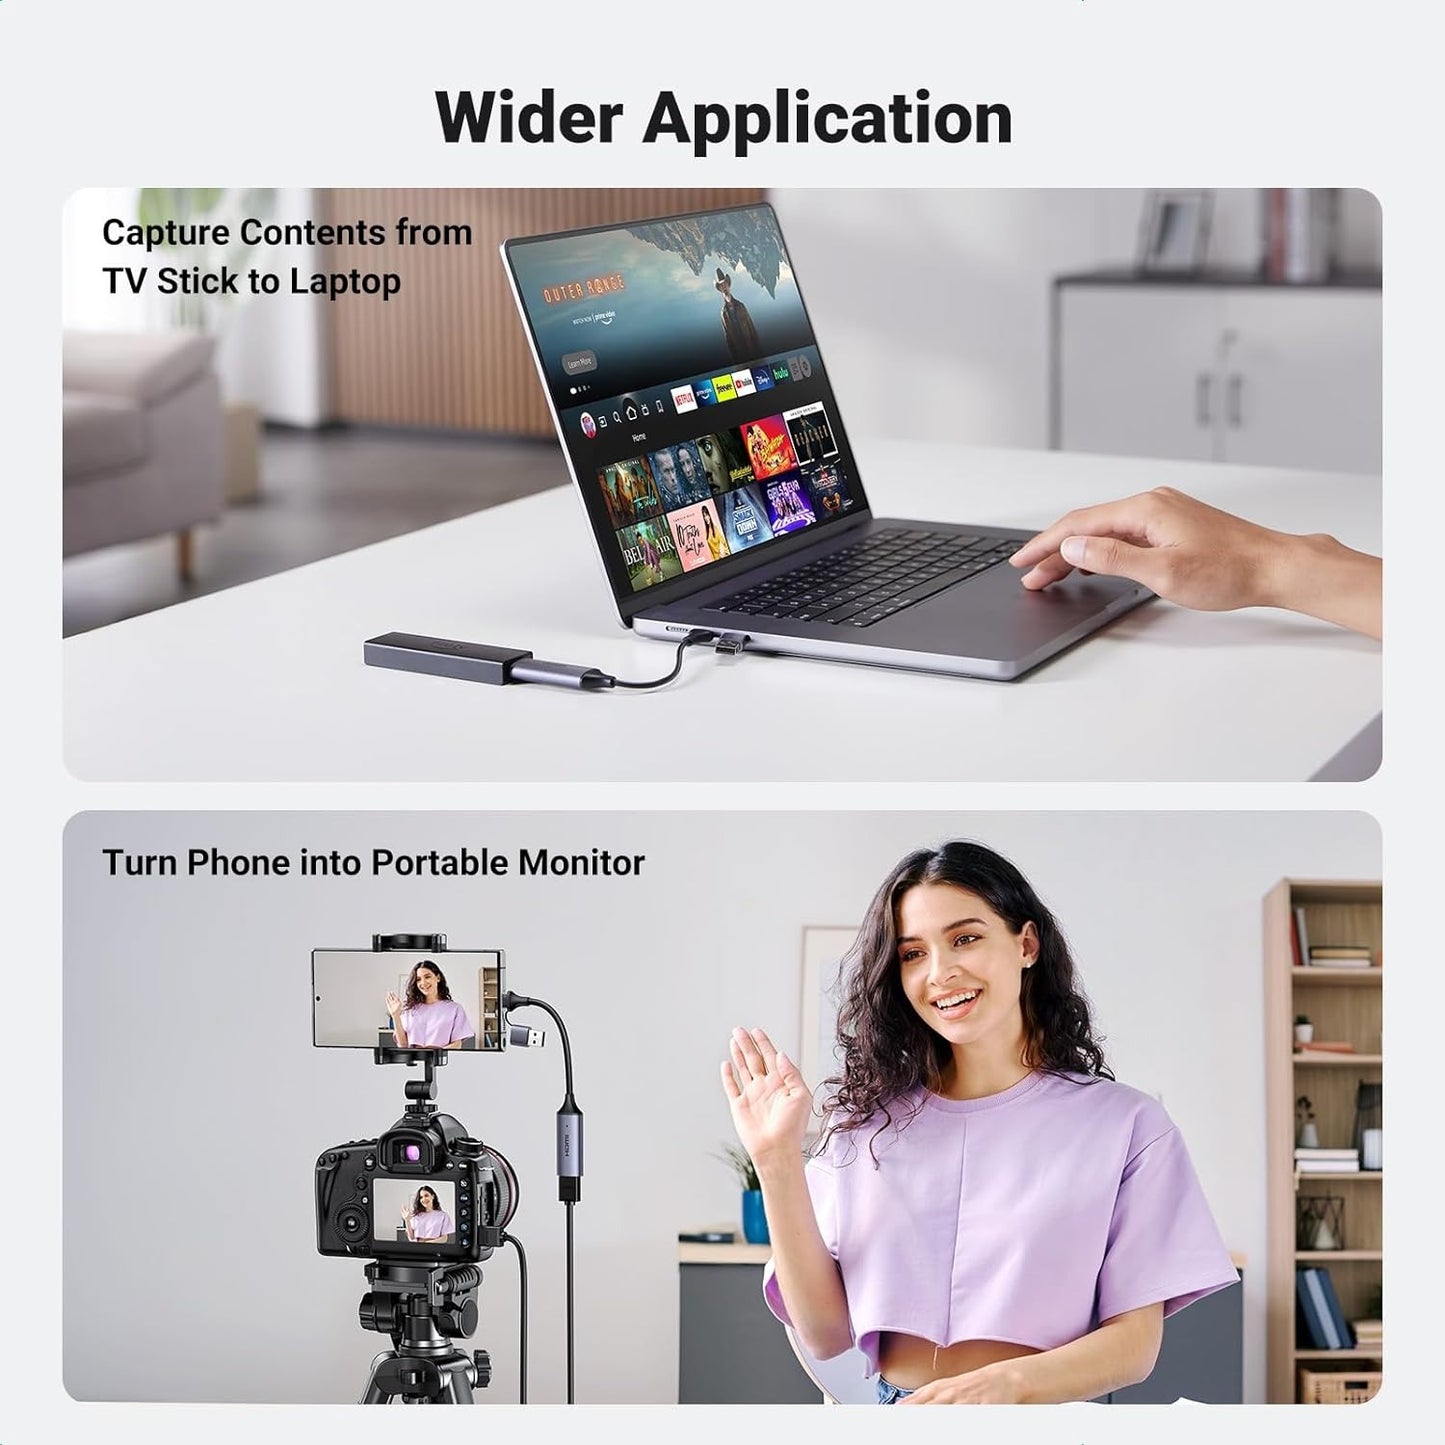 UGREEN Full HD 1080p USB A / USB C Male to 4K/60Hz HDMI Female Video Capture Card with 480Mbps Transfer Speed for Game Consoles, Smartphones, Cameras, Tablet, Camera, Laptop, PC, Computer with Windows 8.1/10/macOS/Linux/Android 5.0 | 40189